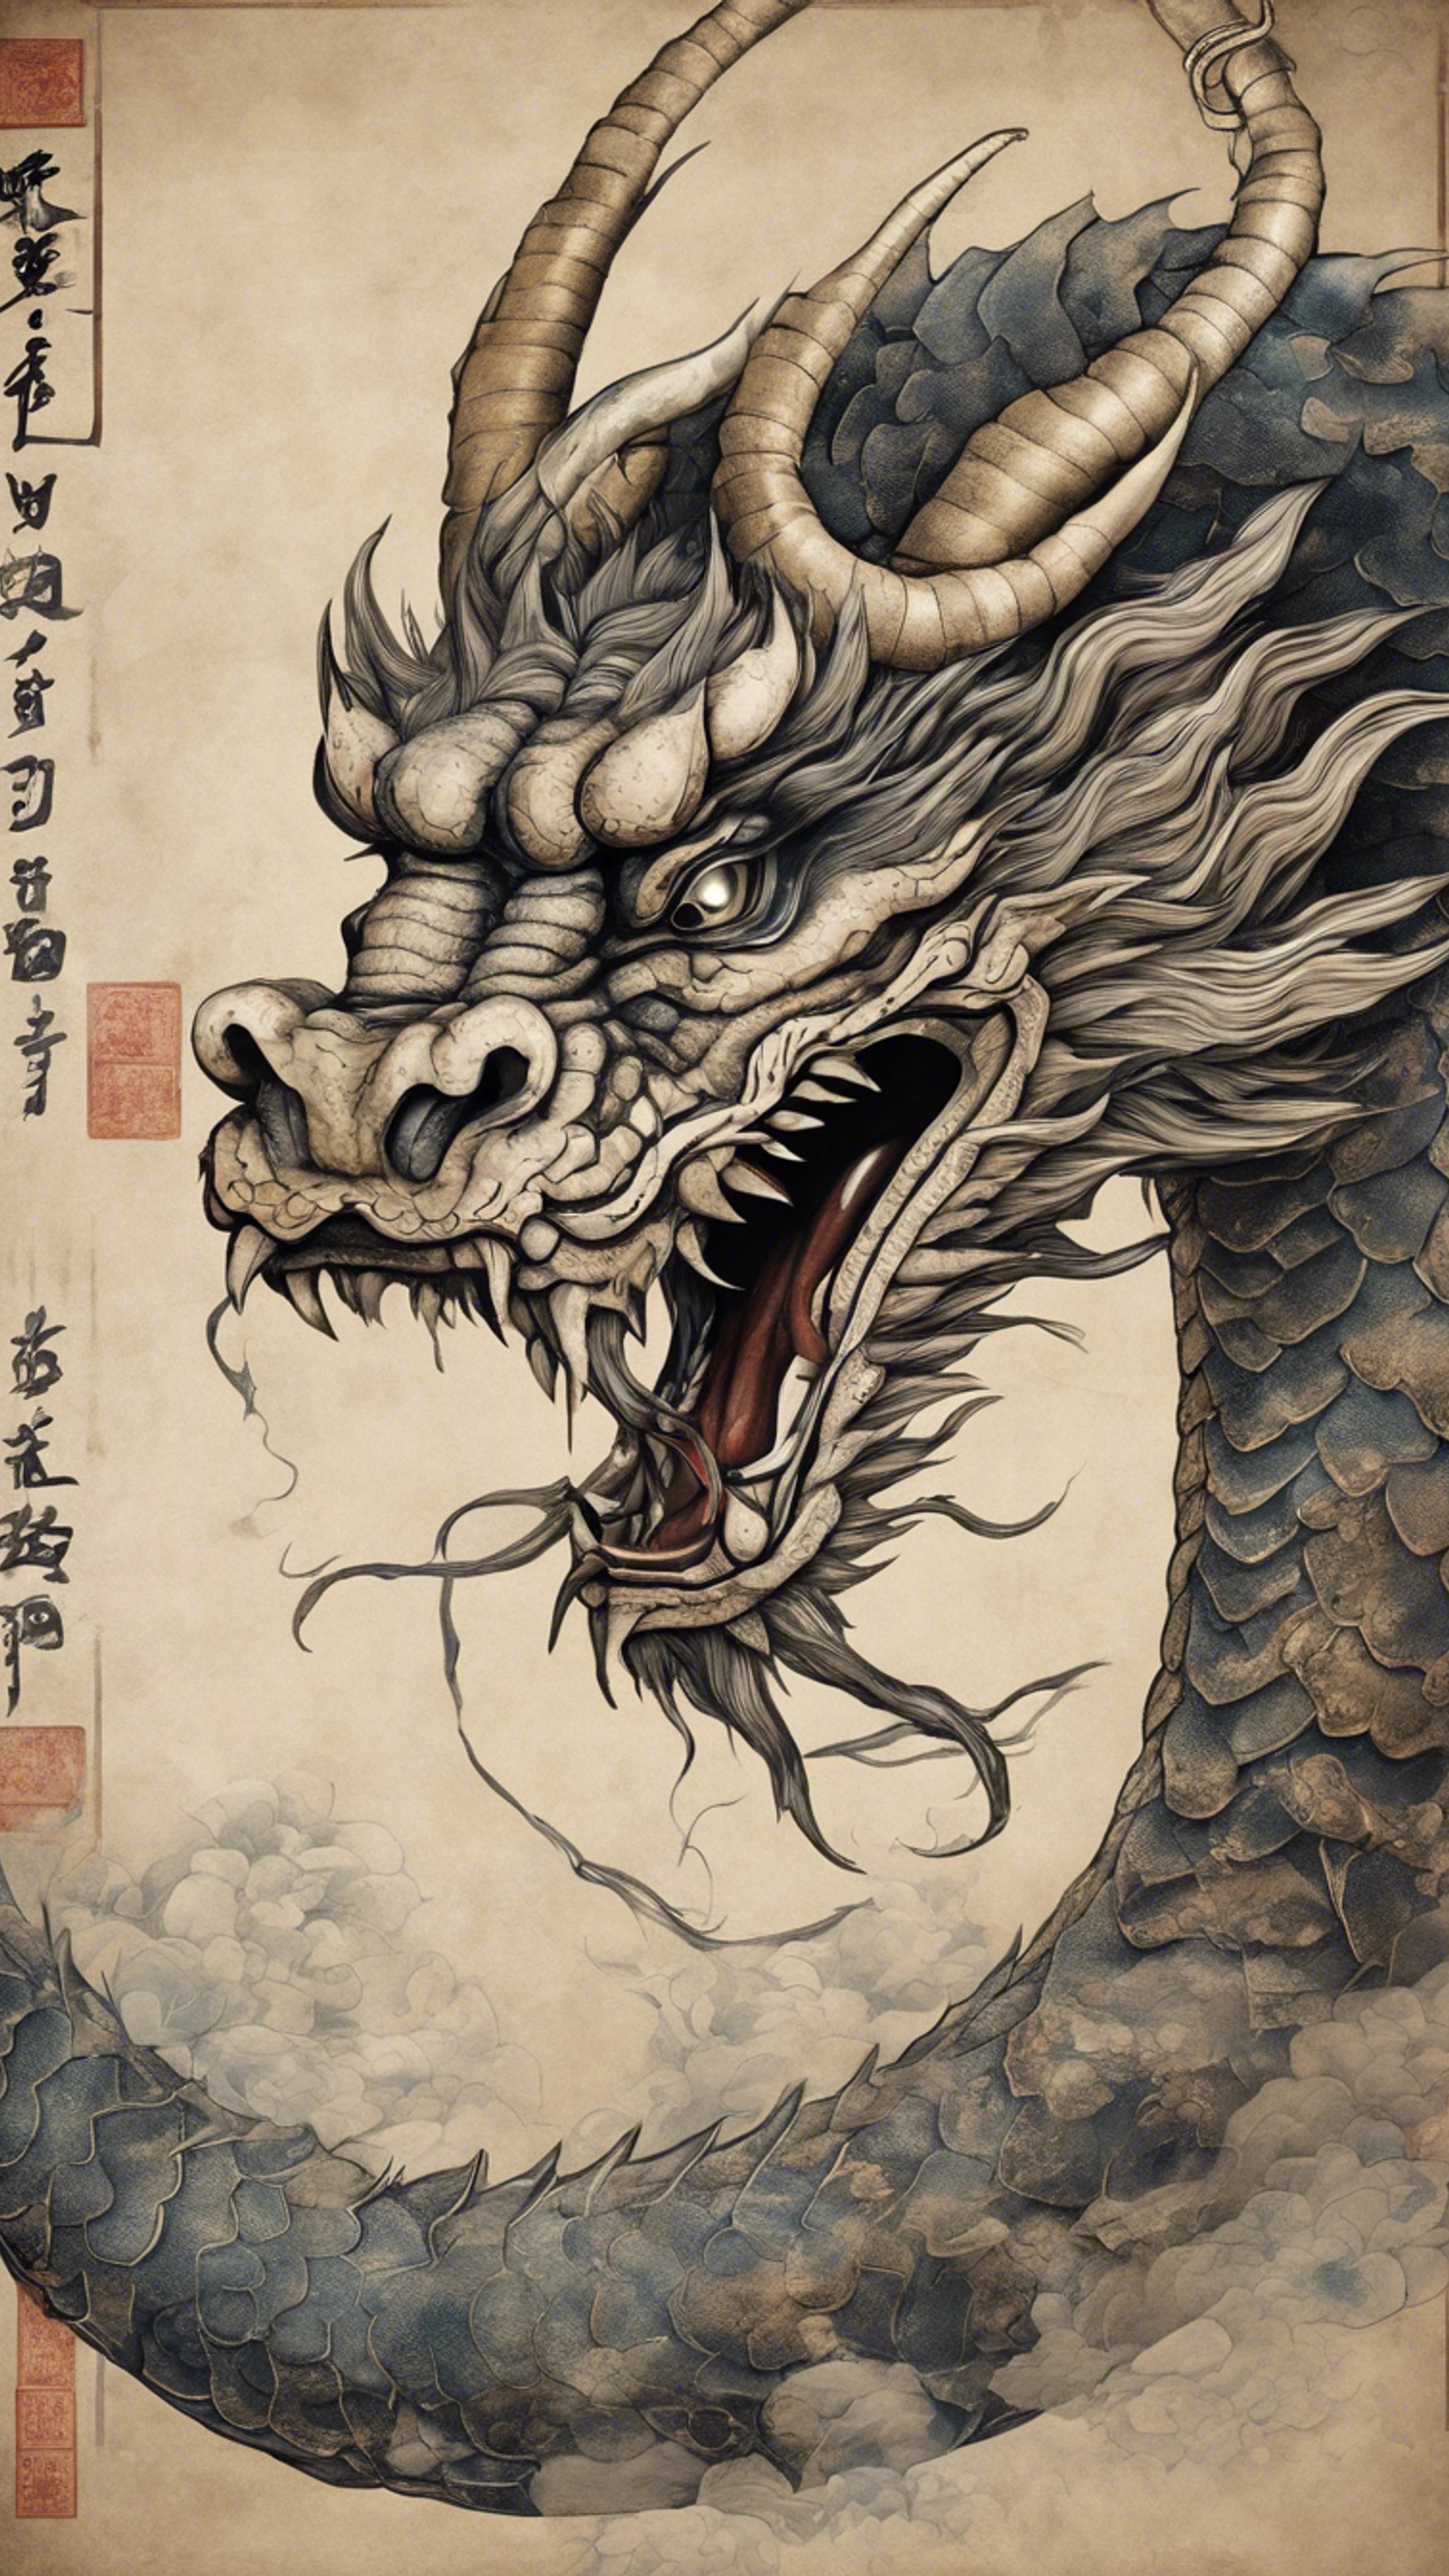 A majestic Japanese dragon illustrated in an ancient scroll. Tapeta[ee61e4c394914154b9e3]